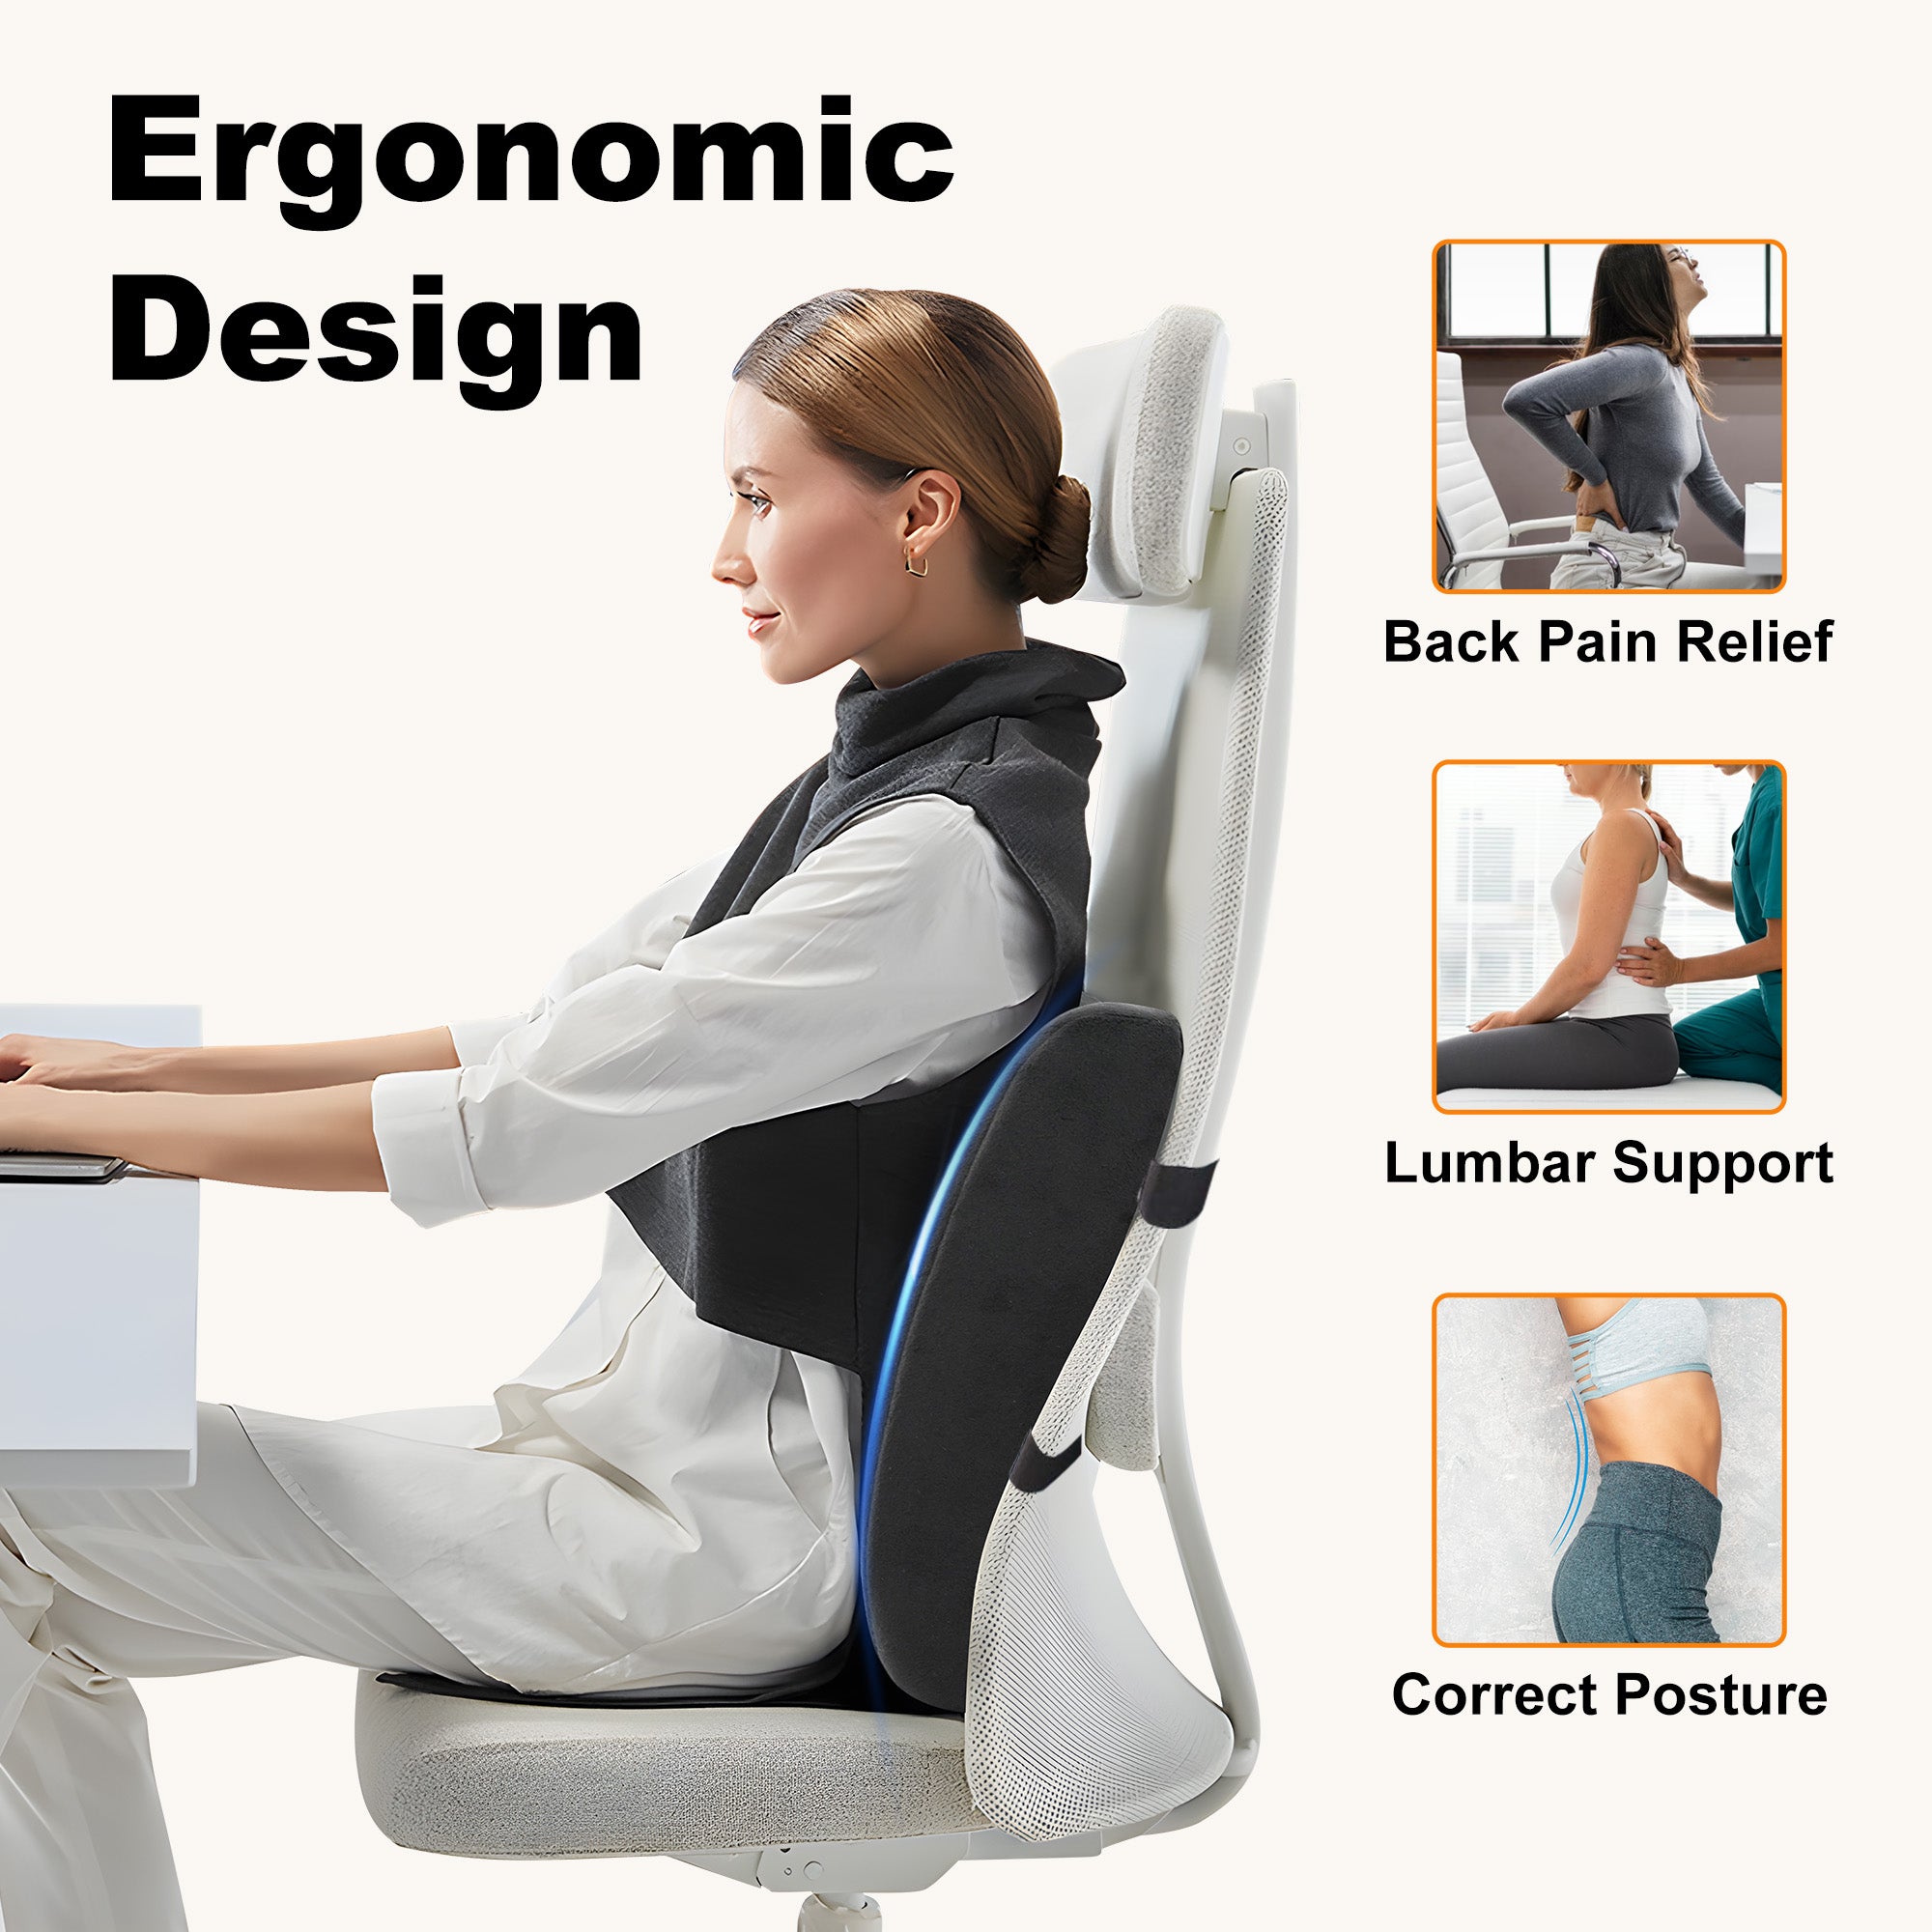 Car Seat Cushion Lumbar Support Pillow For Car-memory Foam Car Back Support  For Driving Fatigue / Back Pain Relief Tw